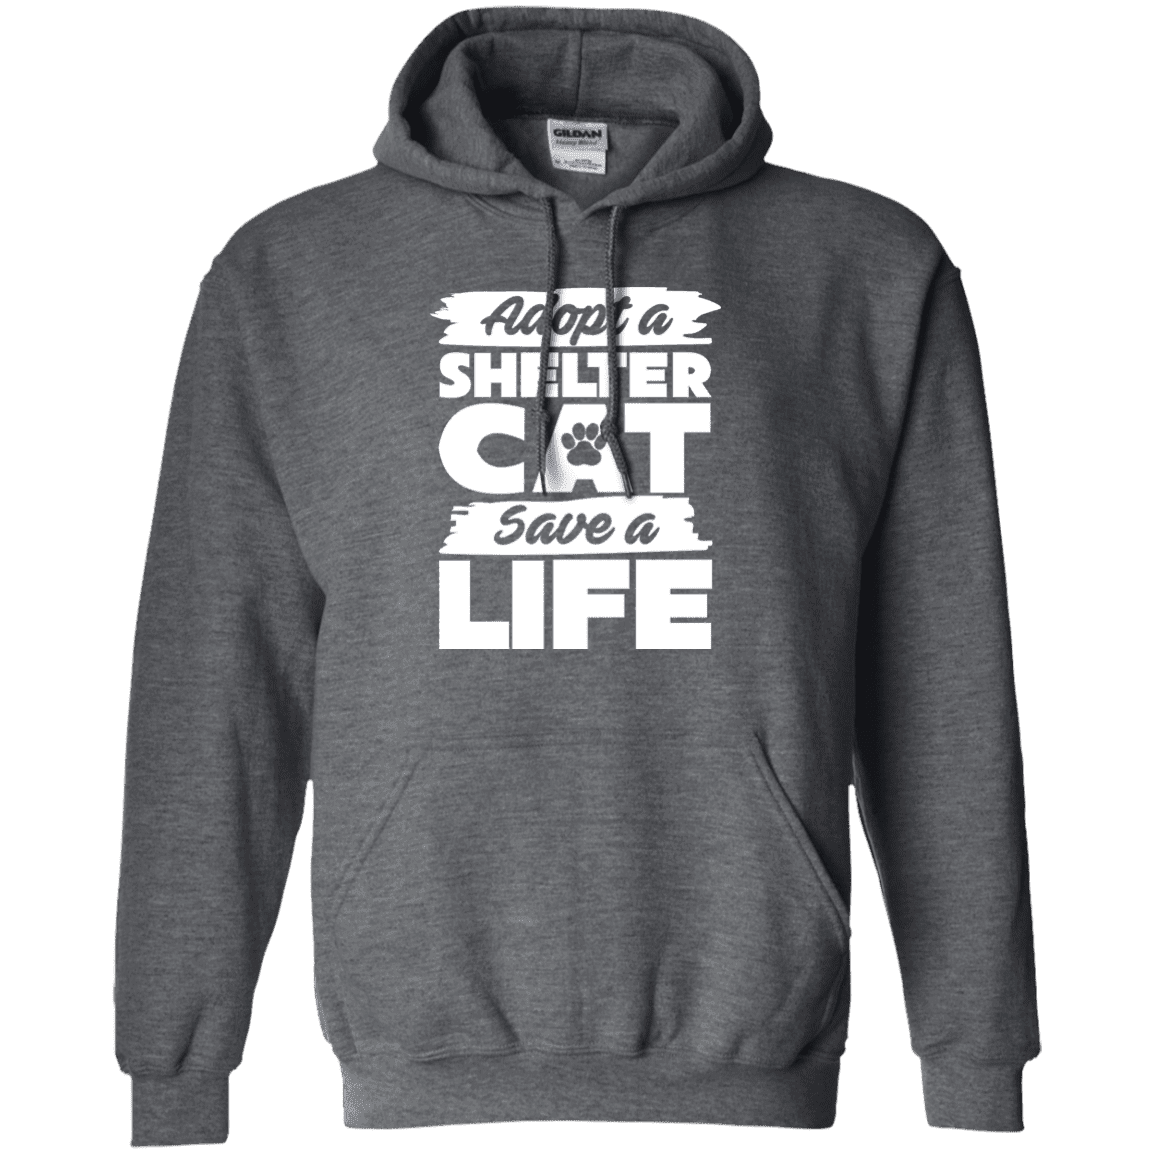 Adopt A Shelter Cat - Hoodie.